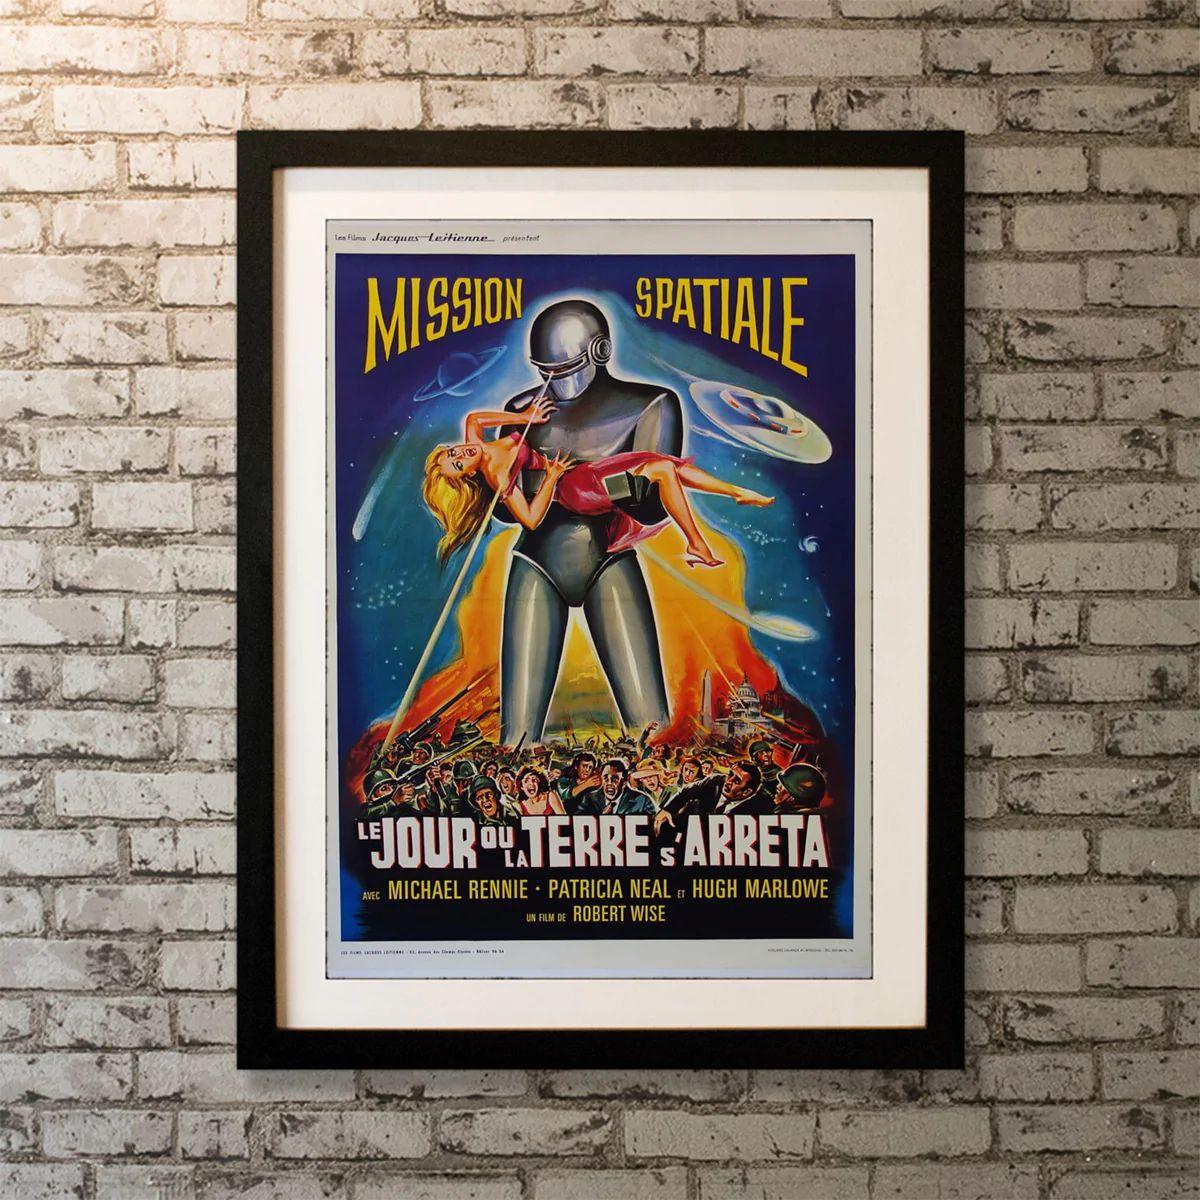 The Day The Earth Stood Still, Unframed Poster, 1960's

Original French Poster (23 X 33 Inches). An alien lands in Washington, D.C. and tells the people of Earth that they must live peacefully or be destroyed as a danger to other planets.

Year: